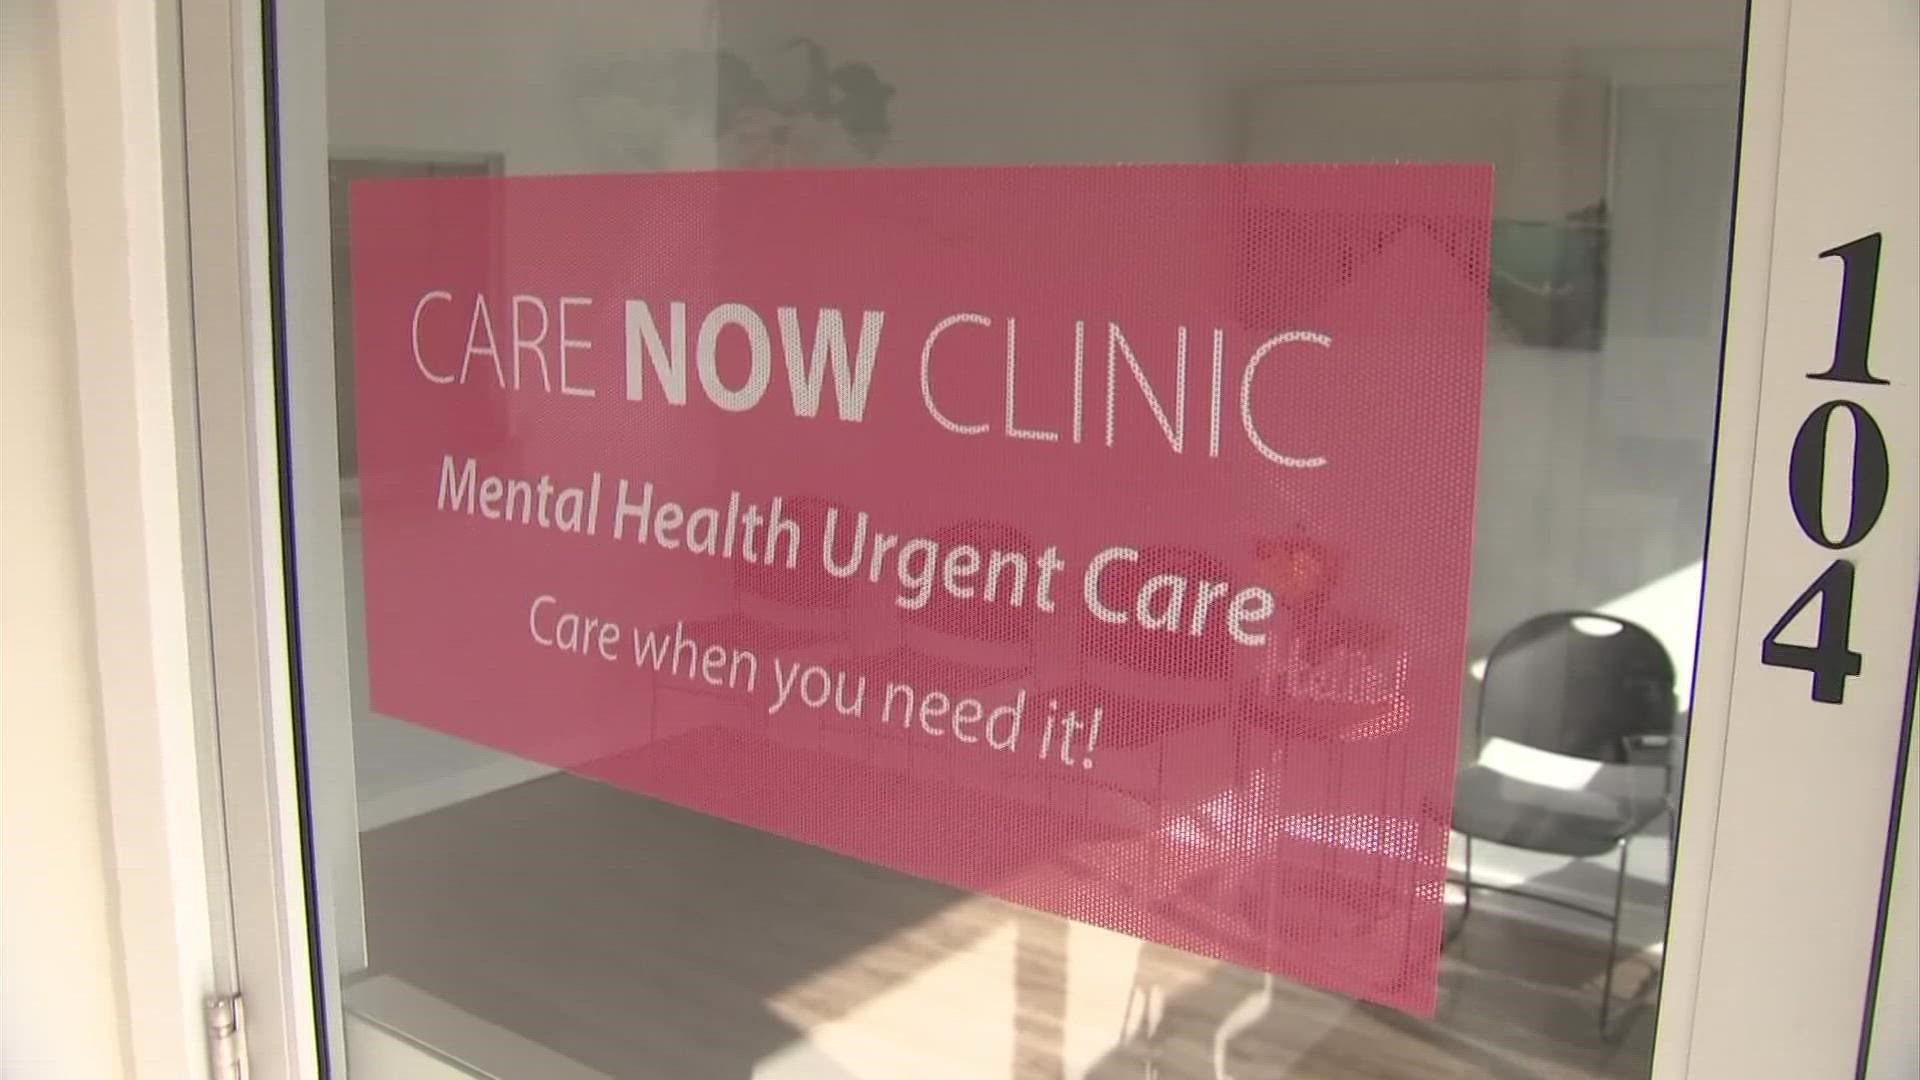 The goal of the Care Now Clinic is to offer support to those facing mental health or addiction challenges.